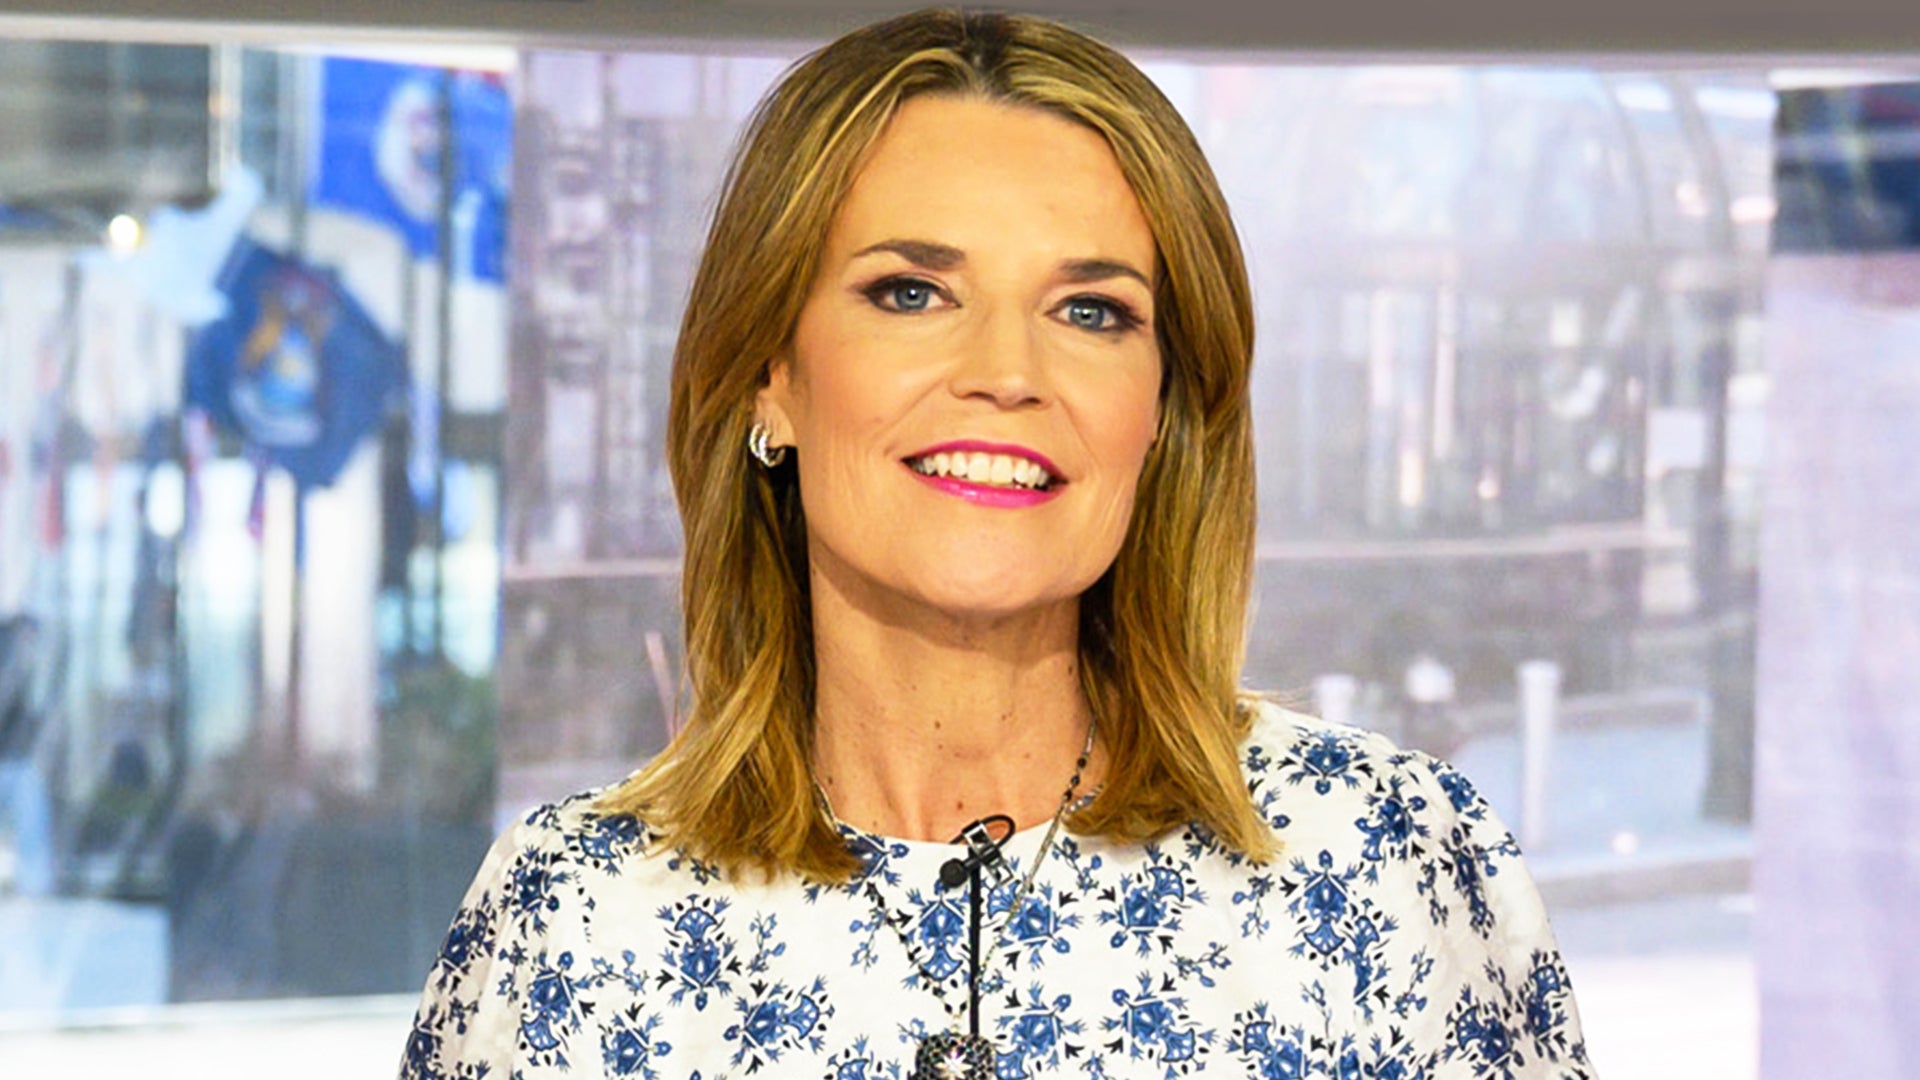 Is Savannah Guthrie Leaving "Today"? What is the Reason?